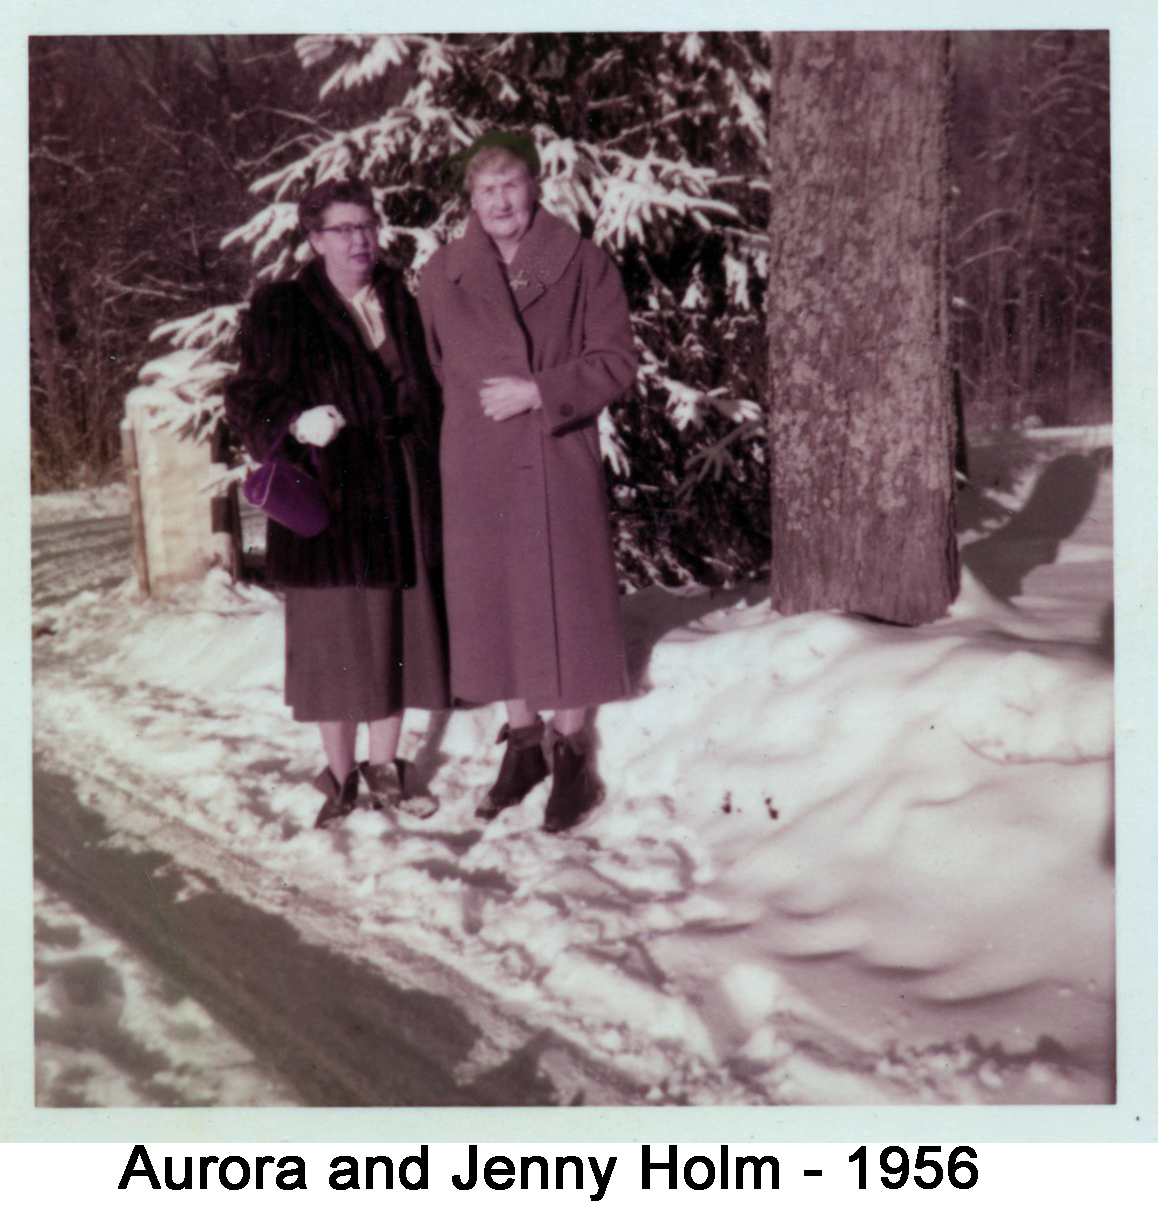 They are standing in the snow. Aurora is wearing a fur coat and Jenny 
         is wearing a long fabric coat.